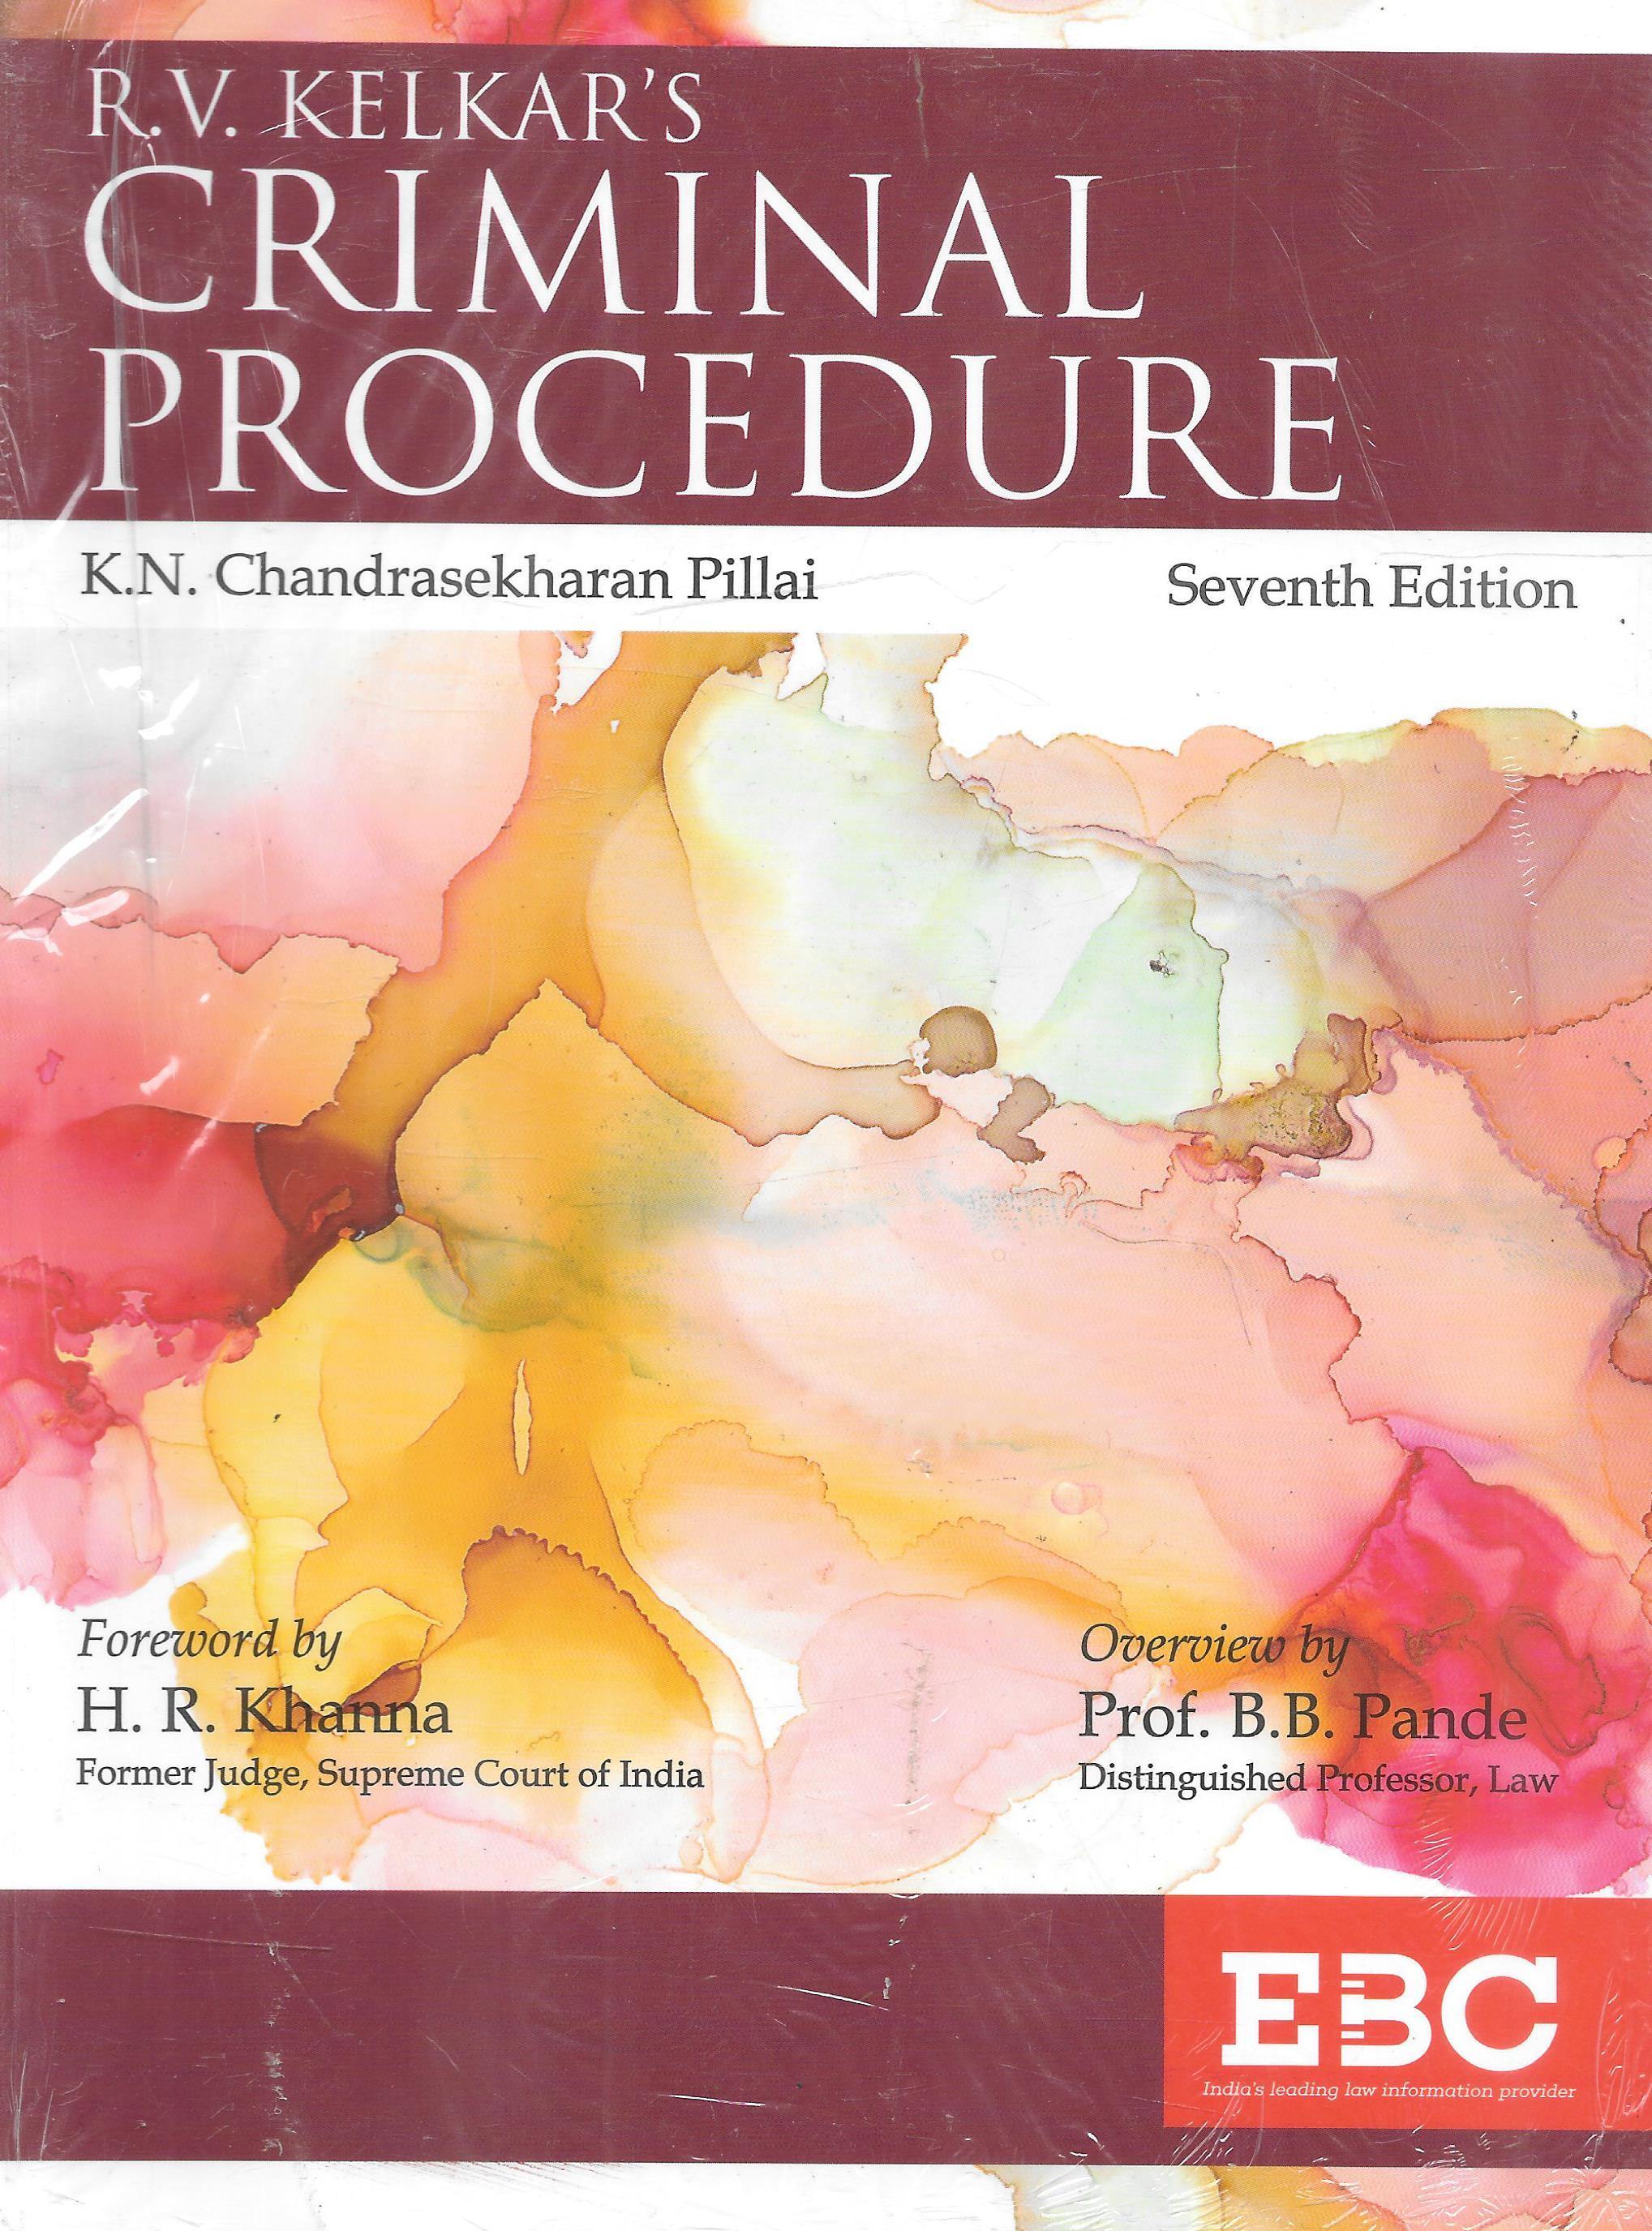 at　Law　The　MJ　Kelkar's　Criminal　Eclectic　Procedure　available　Services　Bookstore